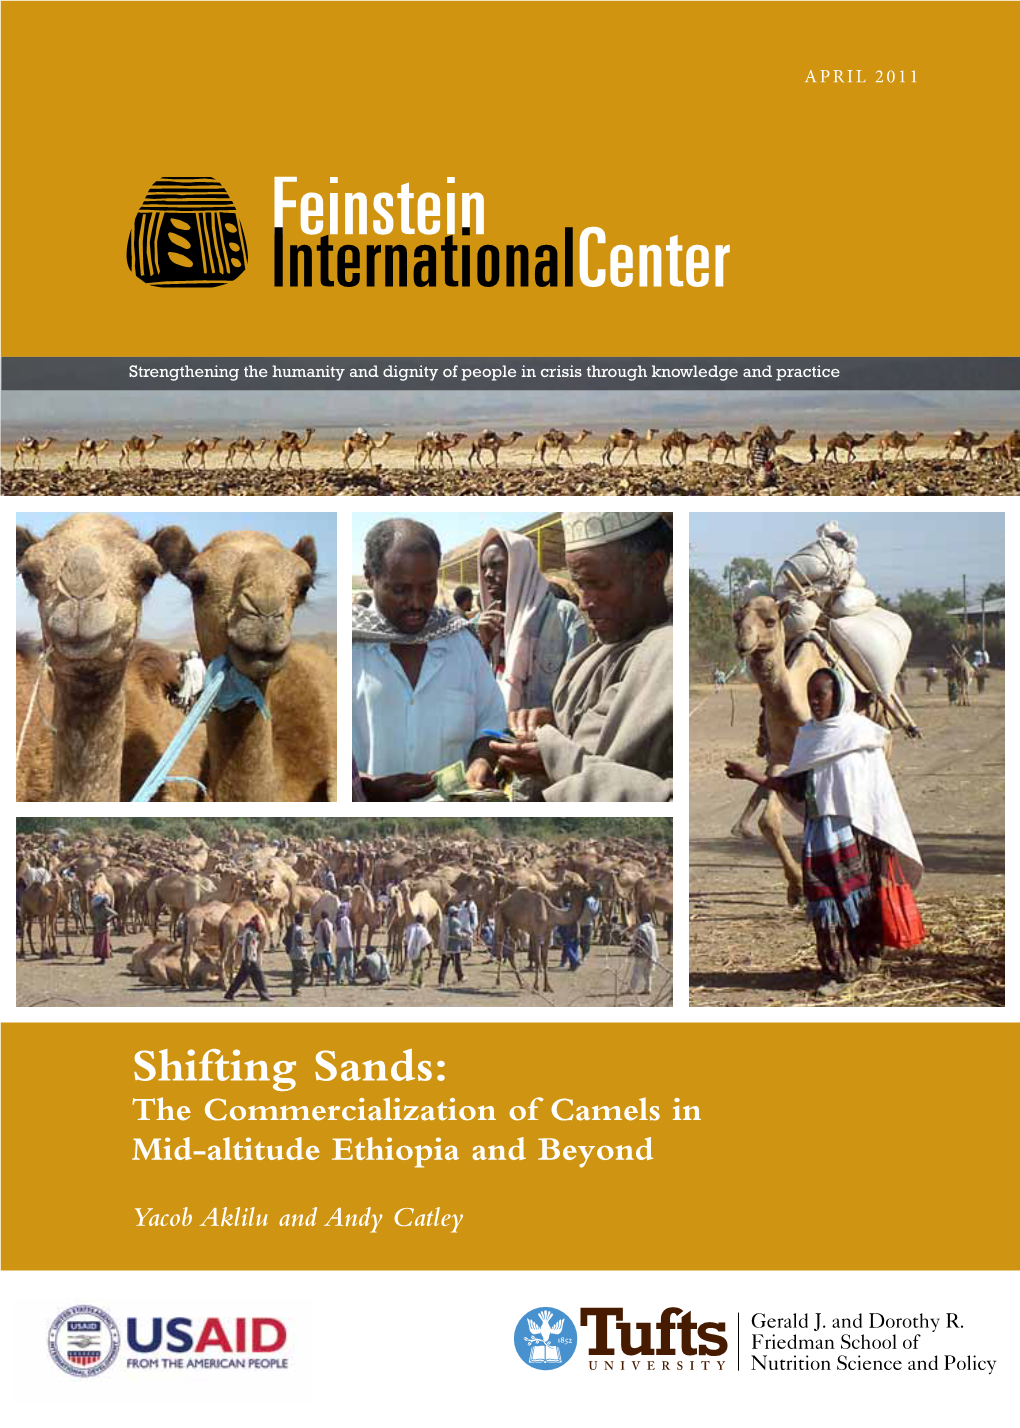 Shifting Sands: the Commercialization of Camels in Mid-Altitude Ethiopia and Beyond